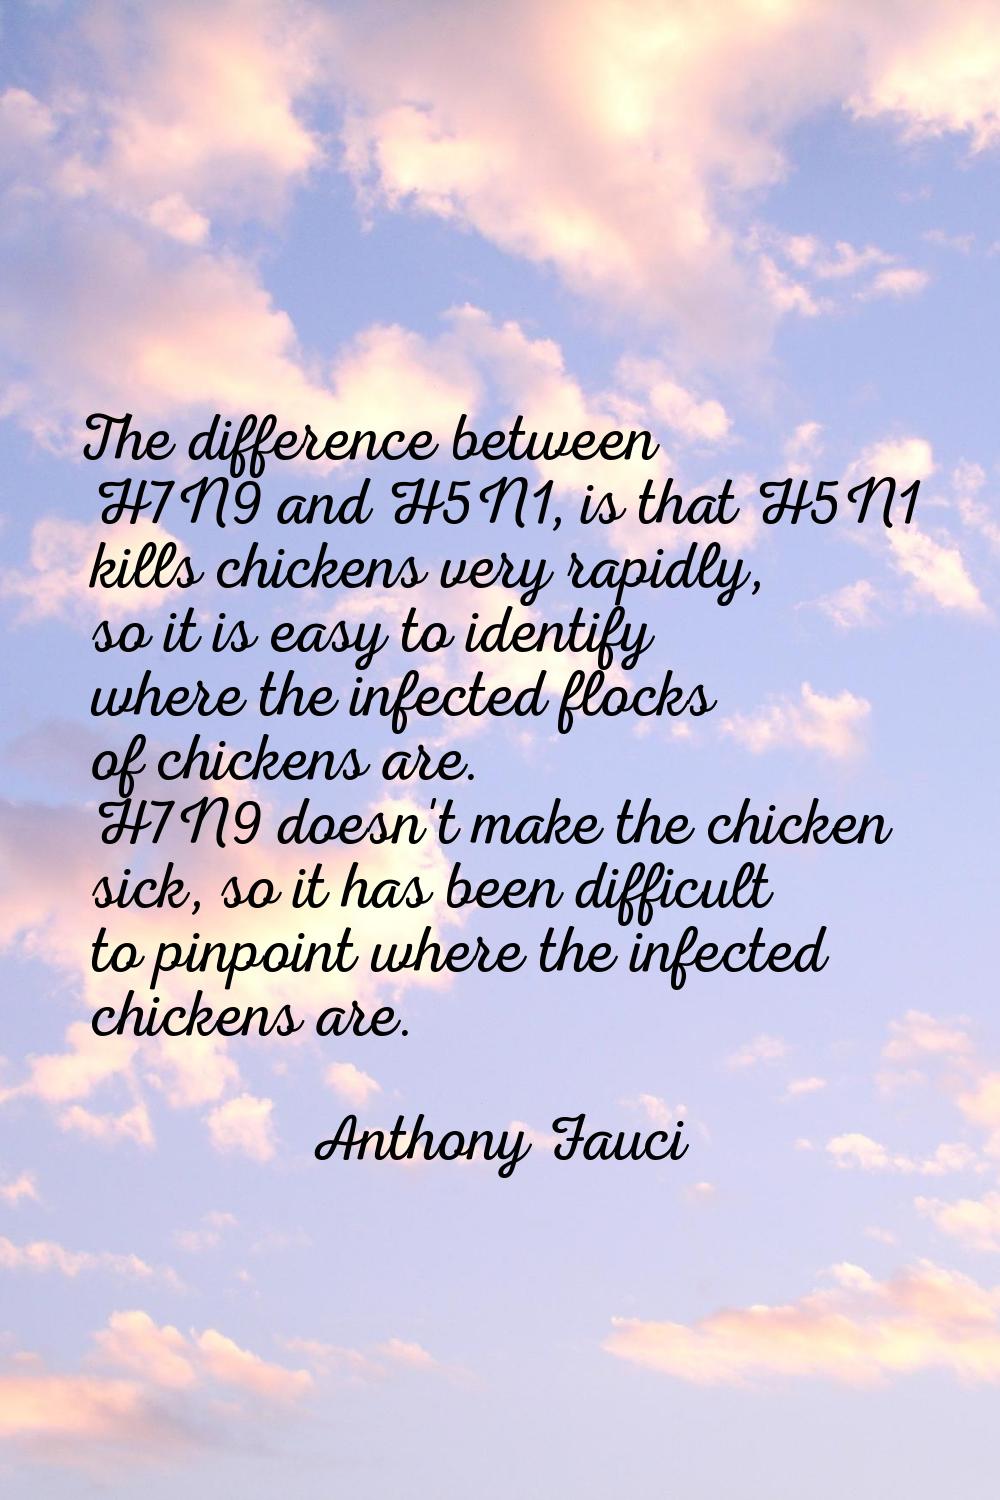 The difference between H7N9 and H5N1, is that H5N1 kills chickens very rapidly, so it is easy to id